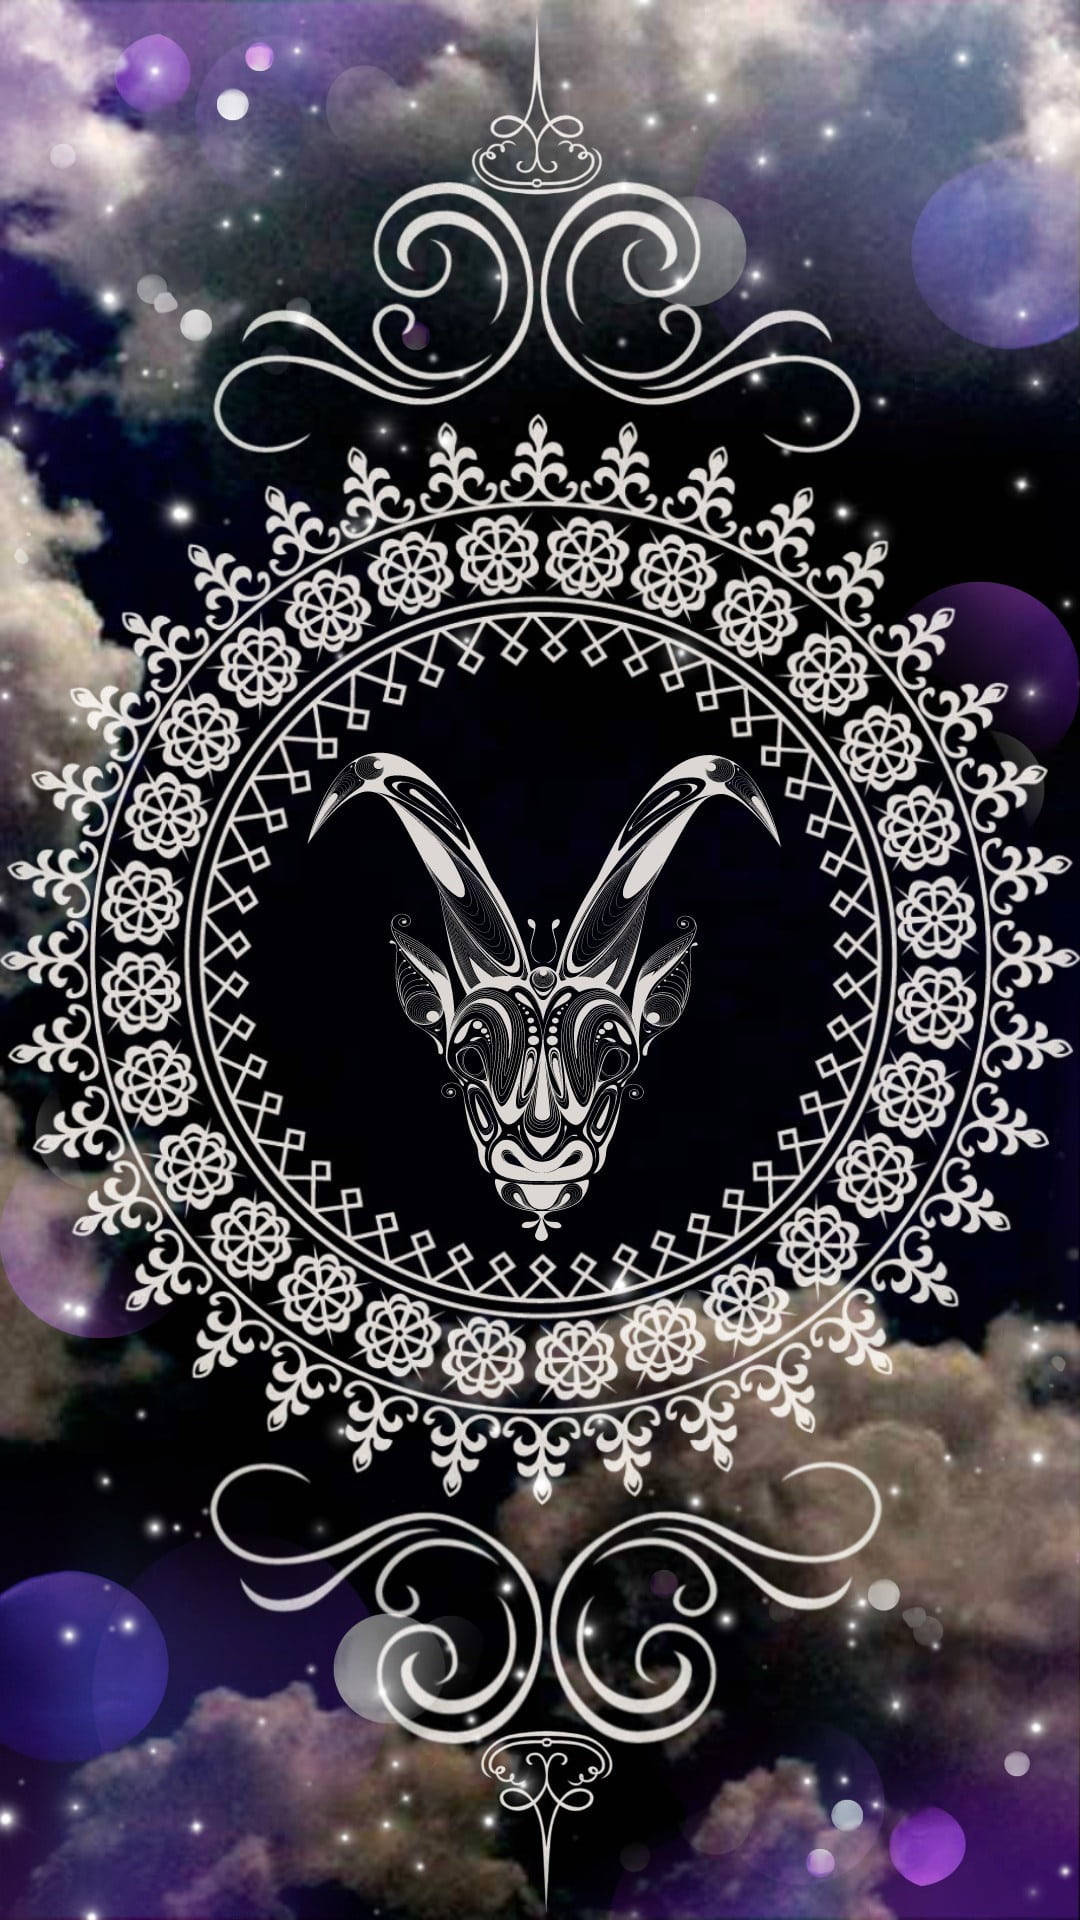 A ram in the sky with stars and clouds - Capricorn